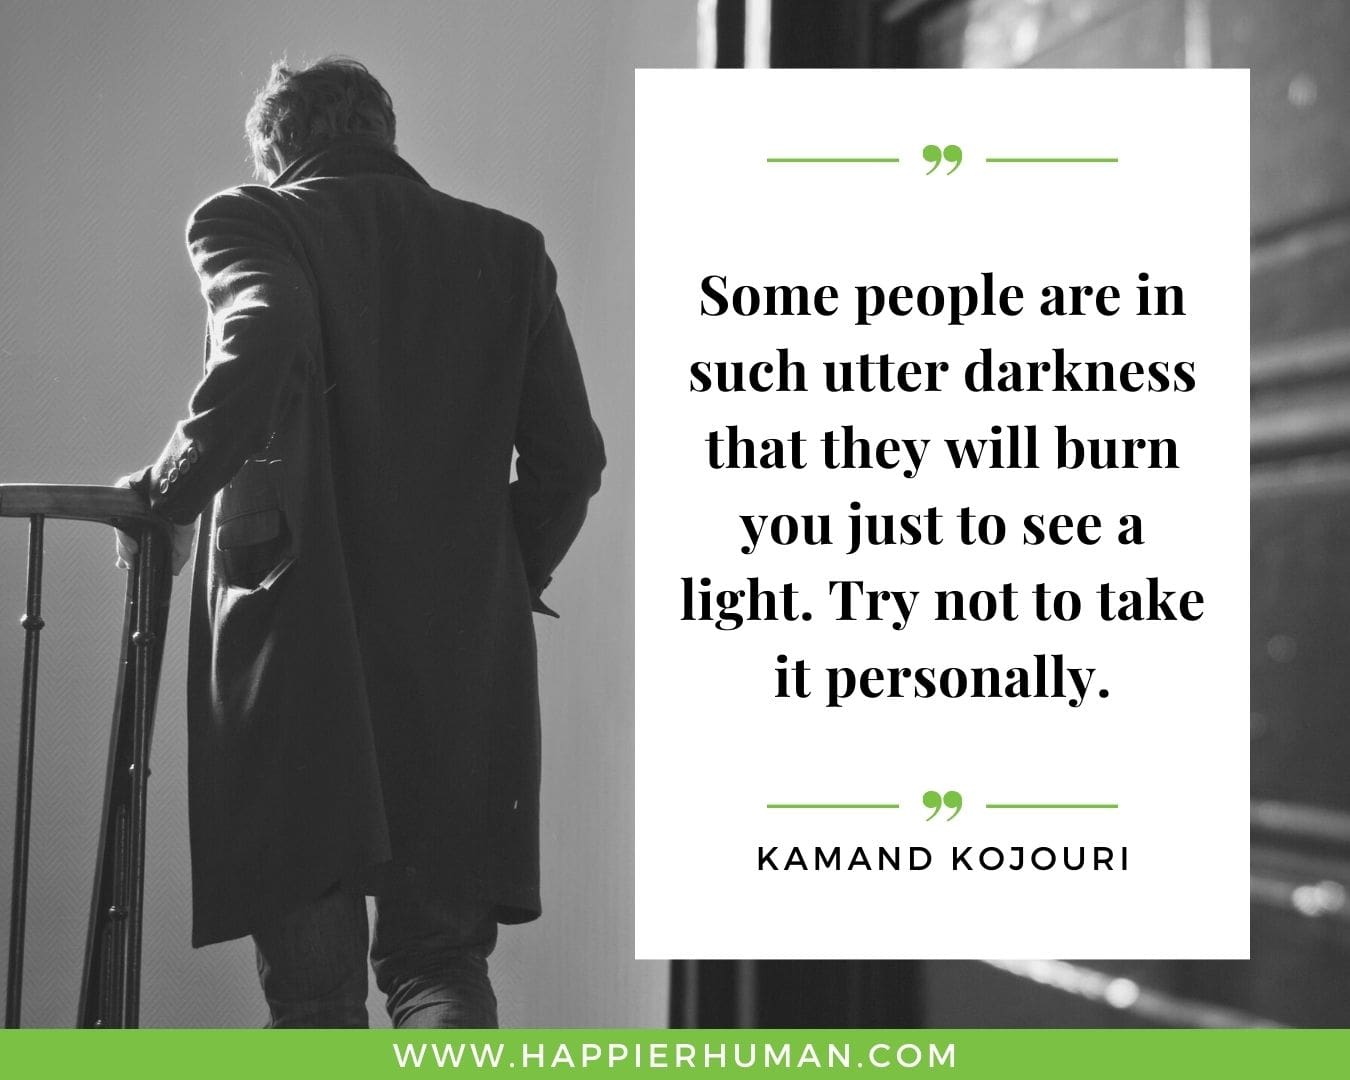 Toxic People Quotes - “Some people are in such utter darkness that they will burn you just to see a light. Try not to take it personally.” – Kamand Kojouri